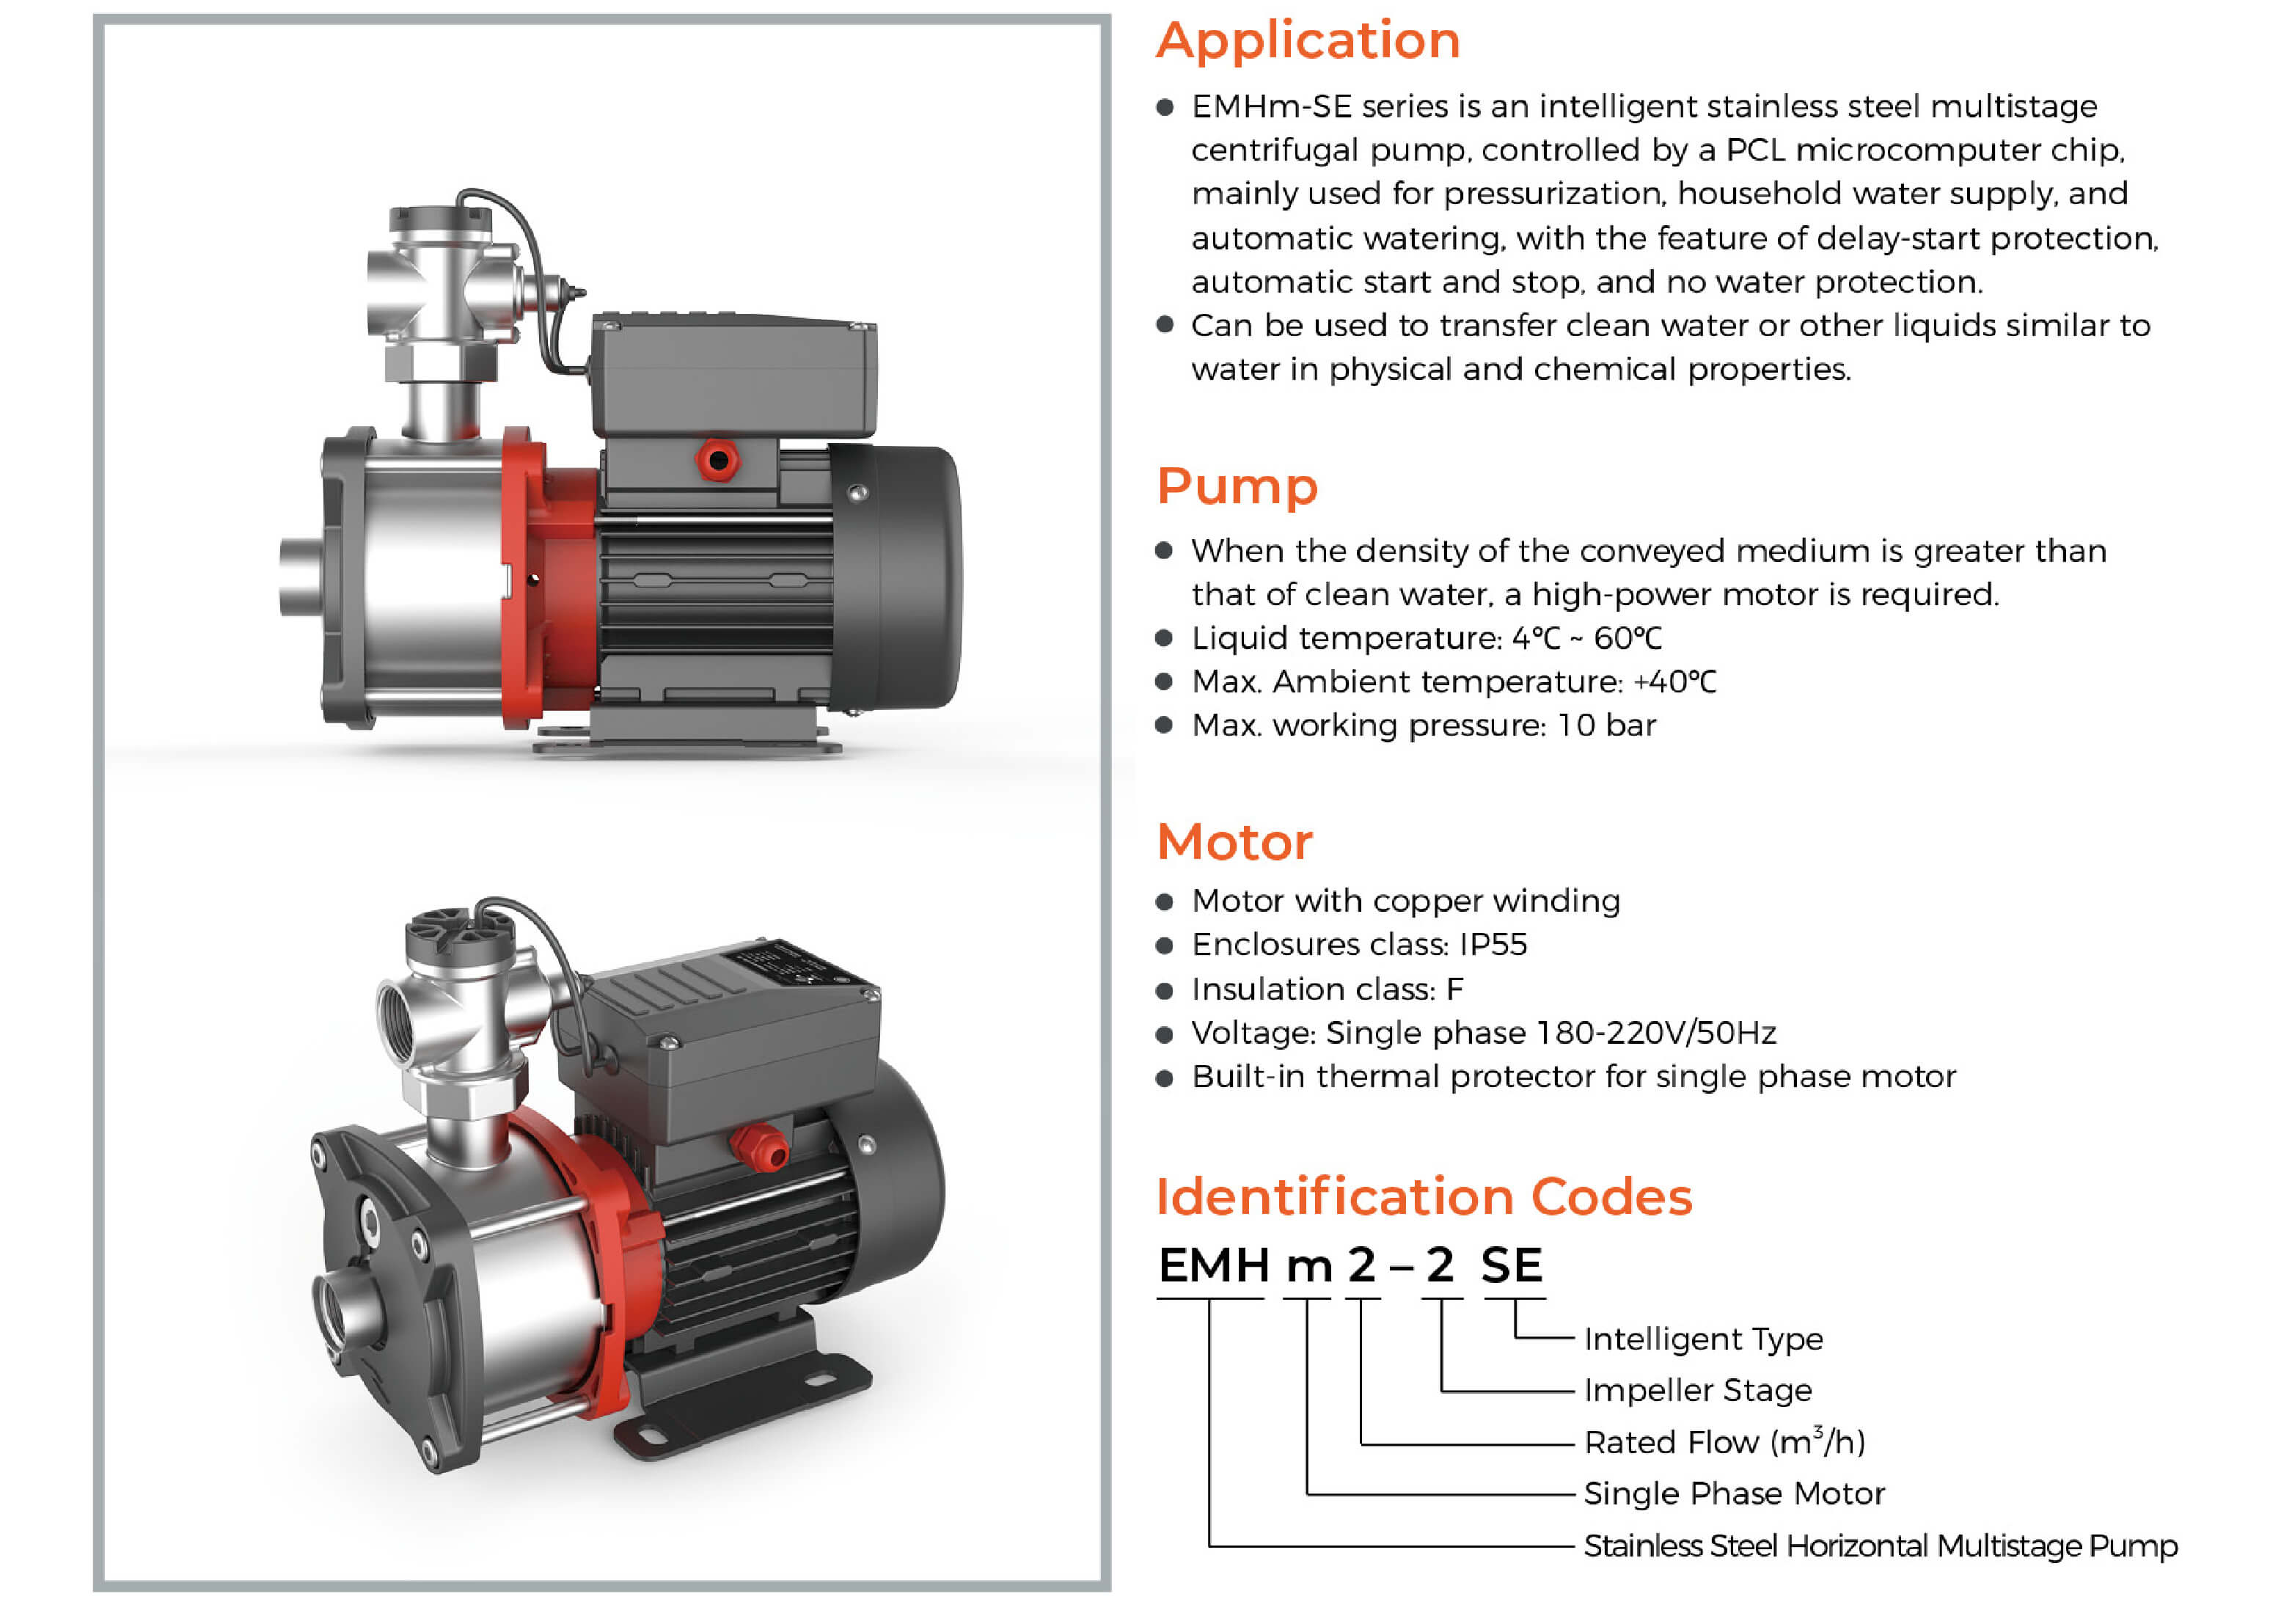 EMHm-SE Stainless Steel Horizontal Multistage Pump Features